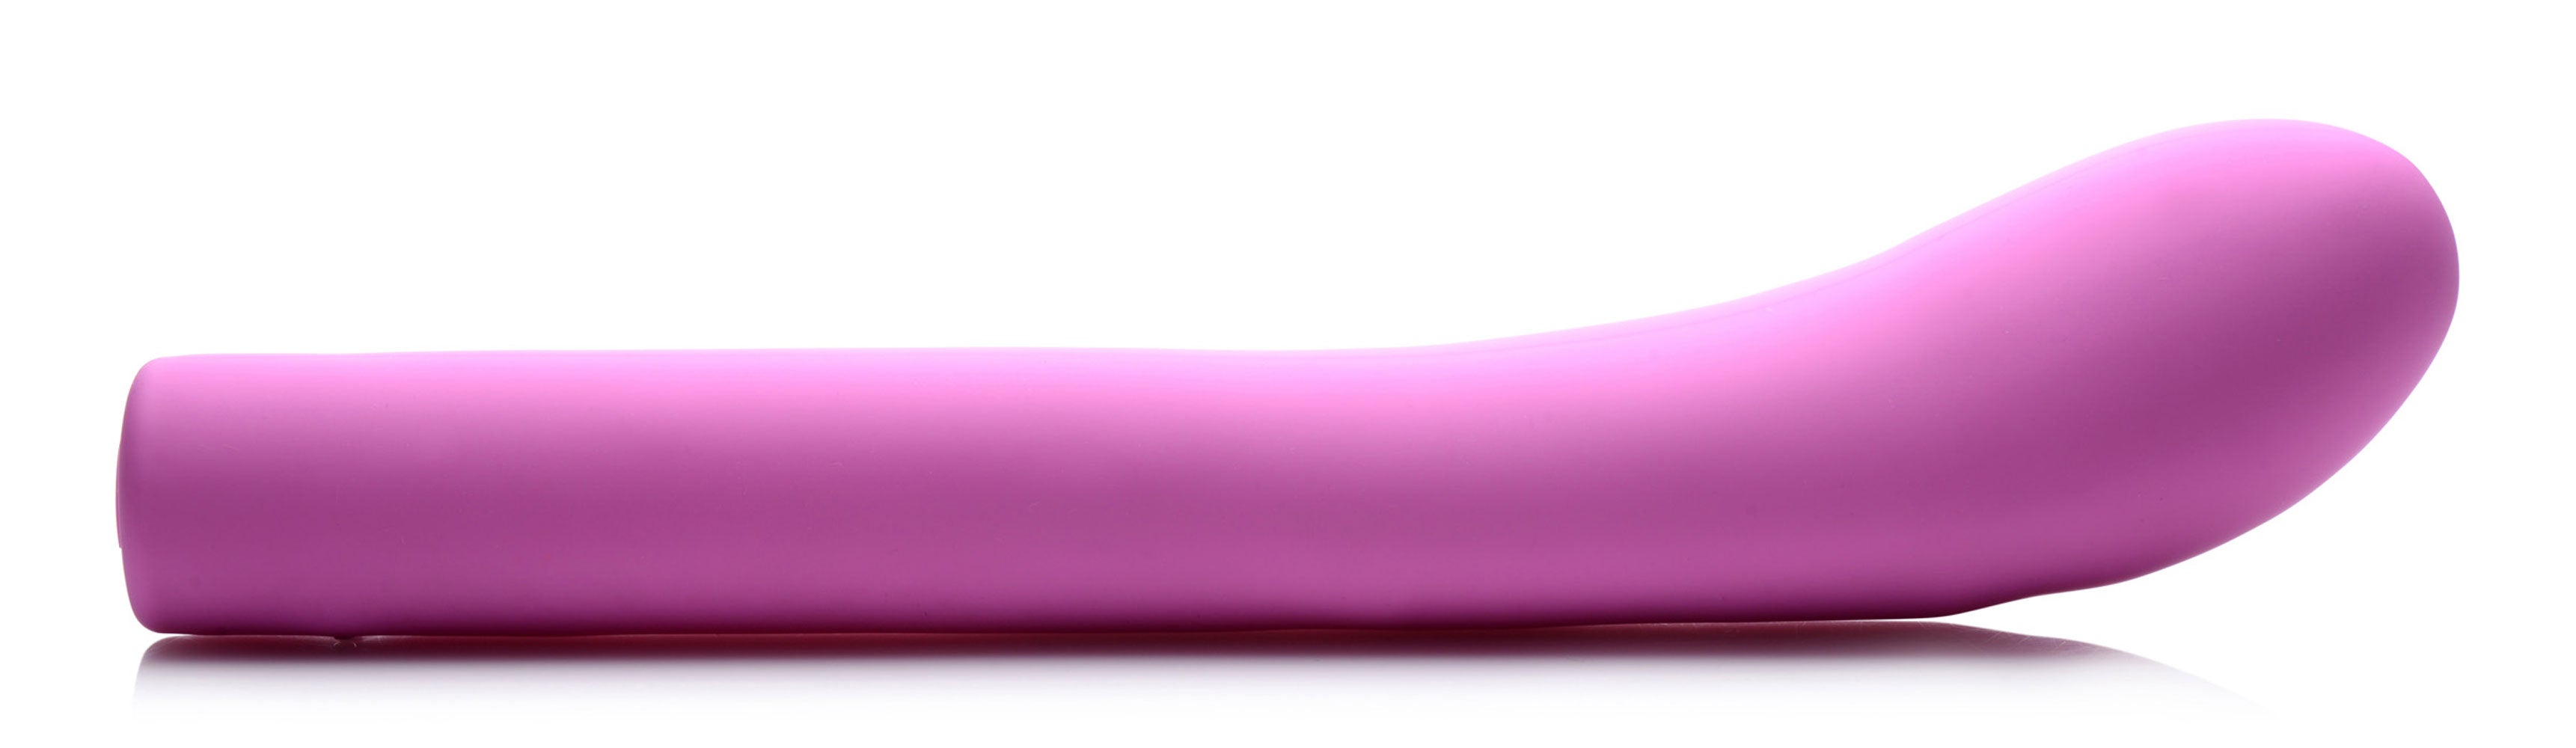 5 Star 9x Come-Hither G-Spot Silicone Vibrator -  Pink INM-AG683PINK